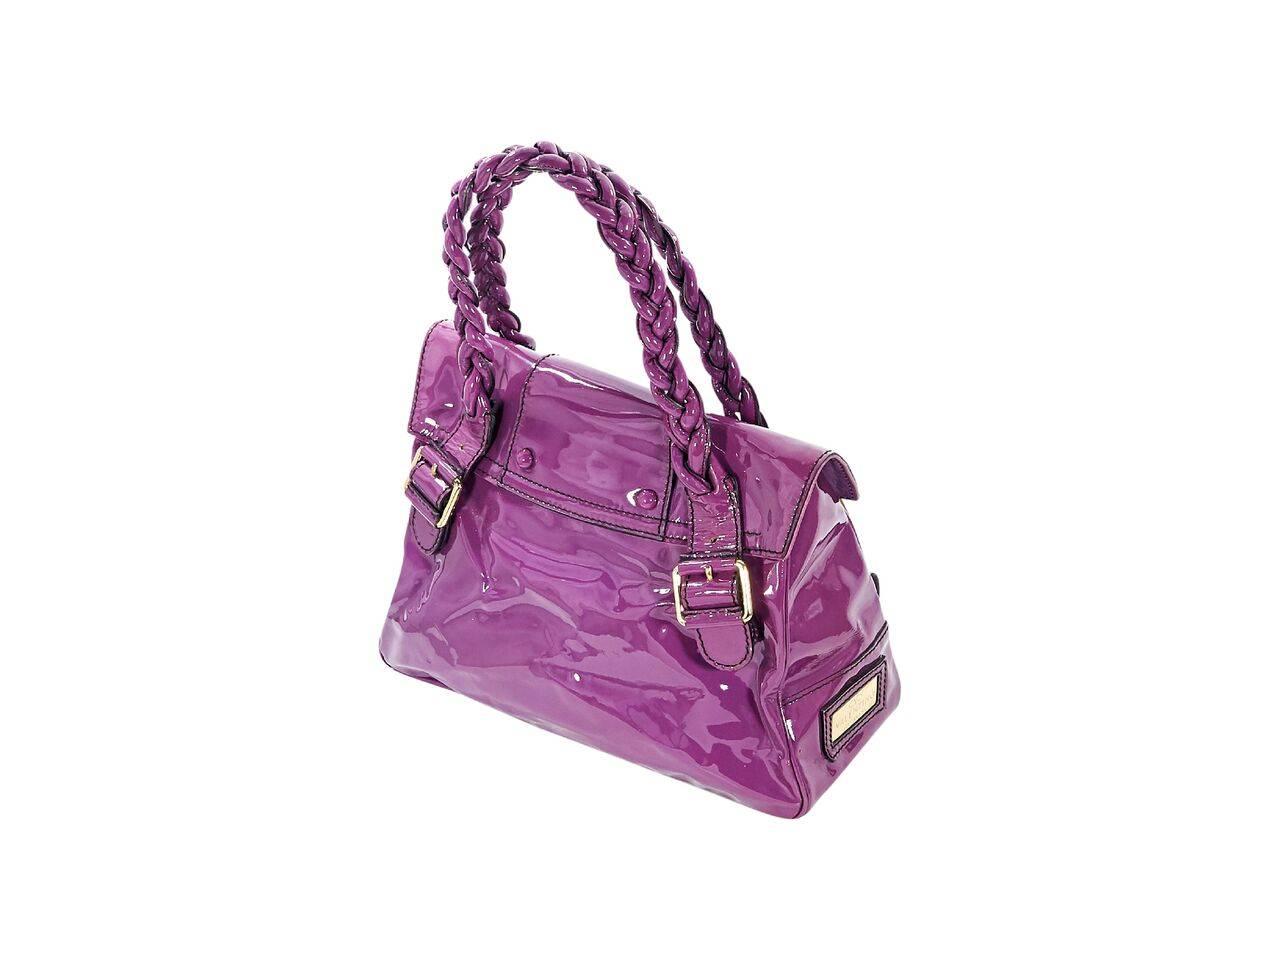 Product details:  Purple patent leather Lacca Histoire bag by Valentino.  Dual braided carry handles.  Front flap with tab closure.  Lined interior with inner zip pocket.  Front exterior flap pockets.  Goldtone hardware.  15"L x 11.5"H x